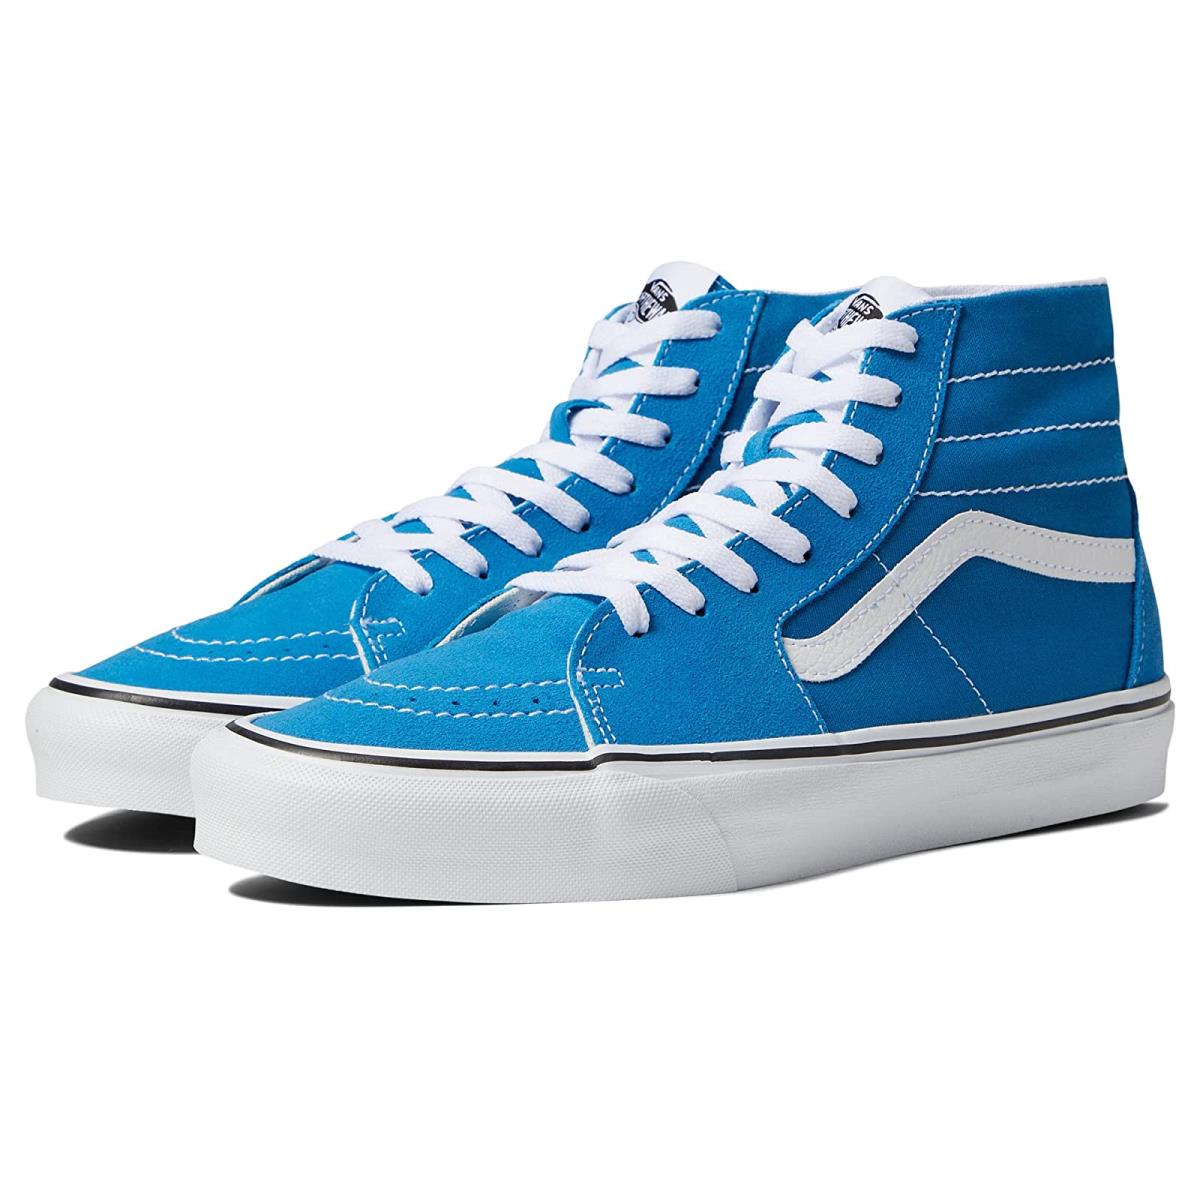 Unisex Sneakers Athletic Shoes Vans Sk8-Hi Tapered Color Theory Mediterranian Blue